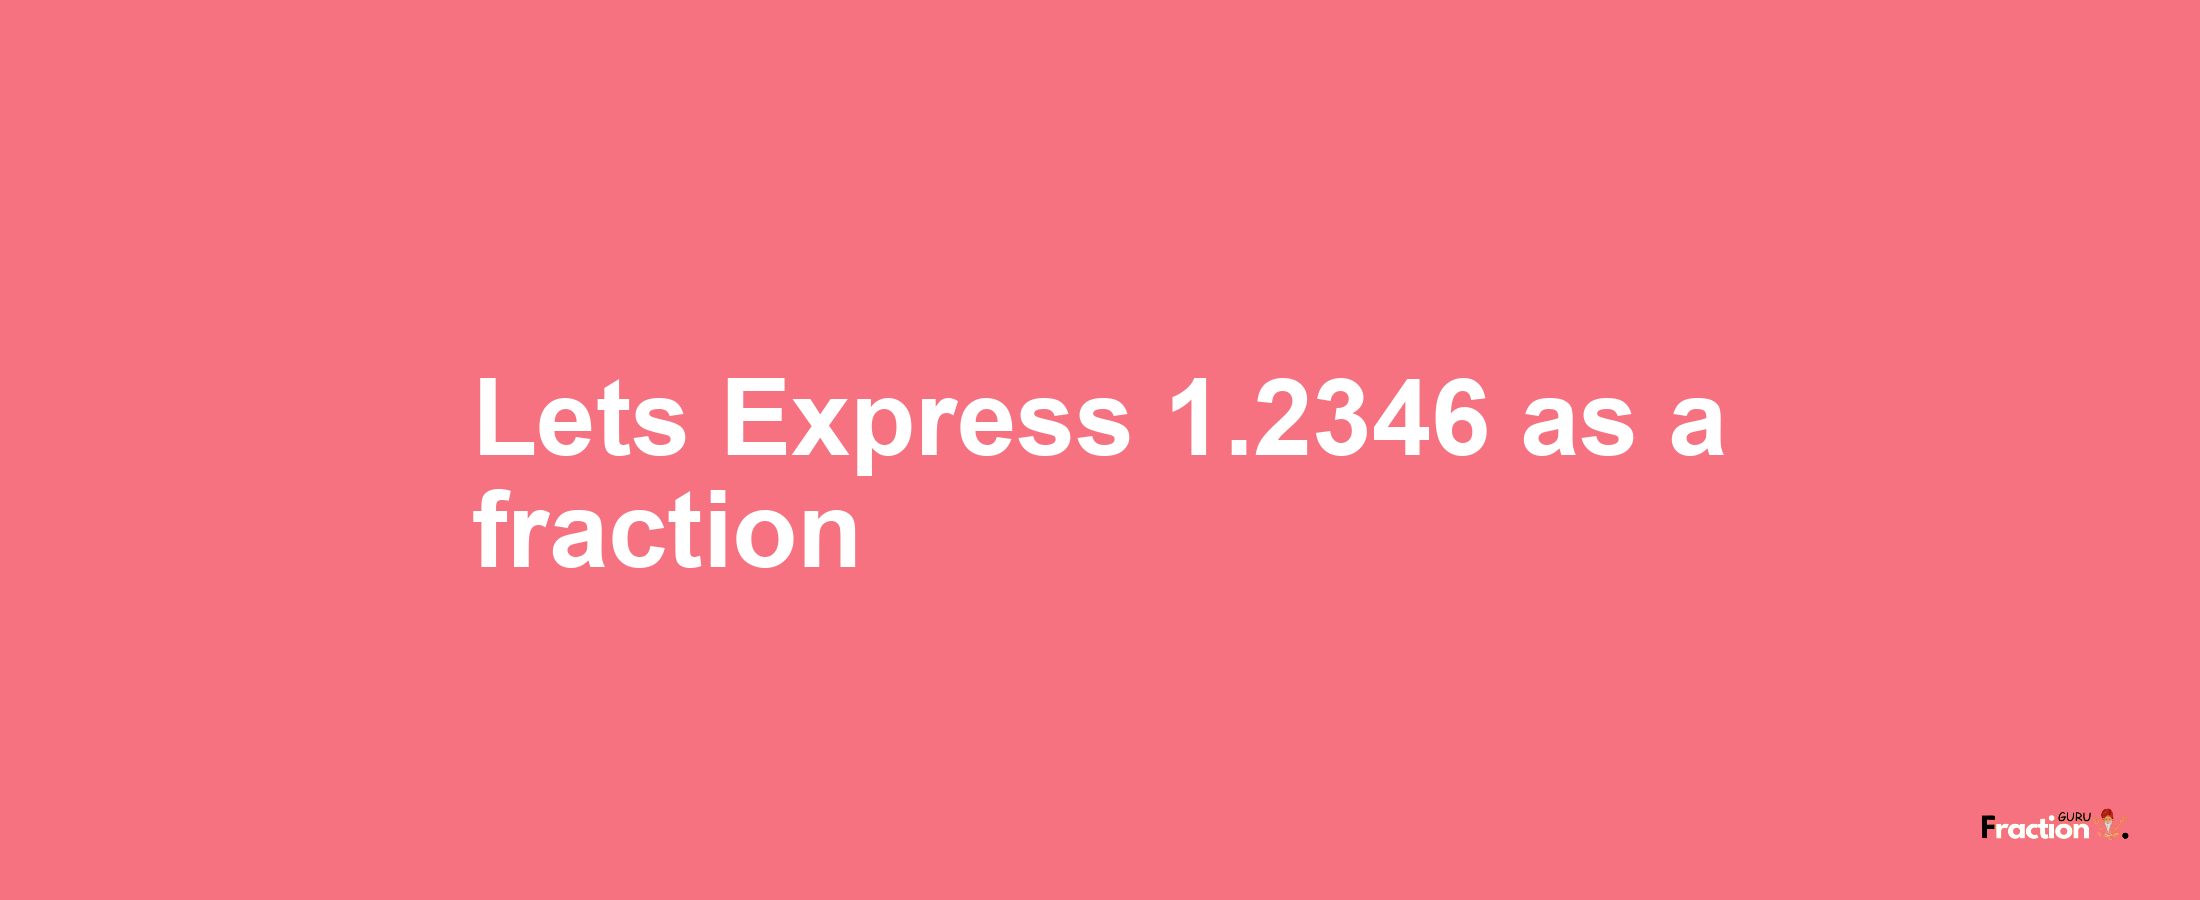 Lets Express 1.2346 as afraction